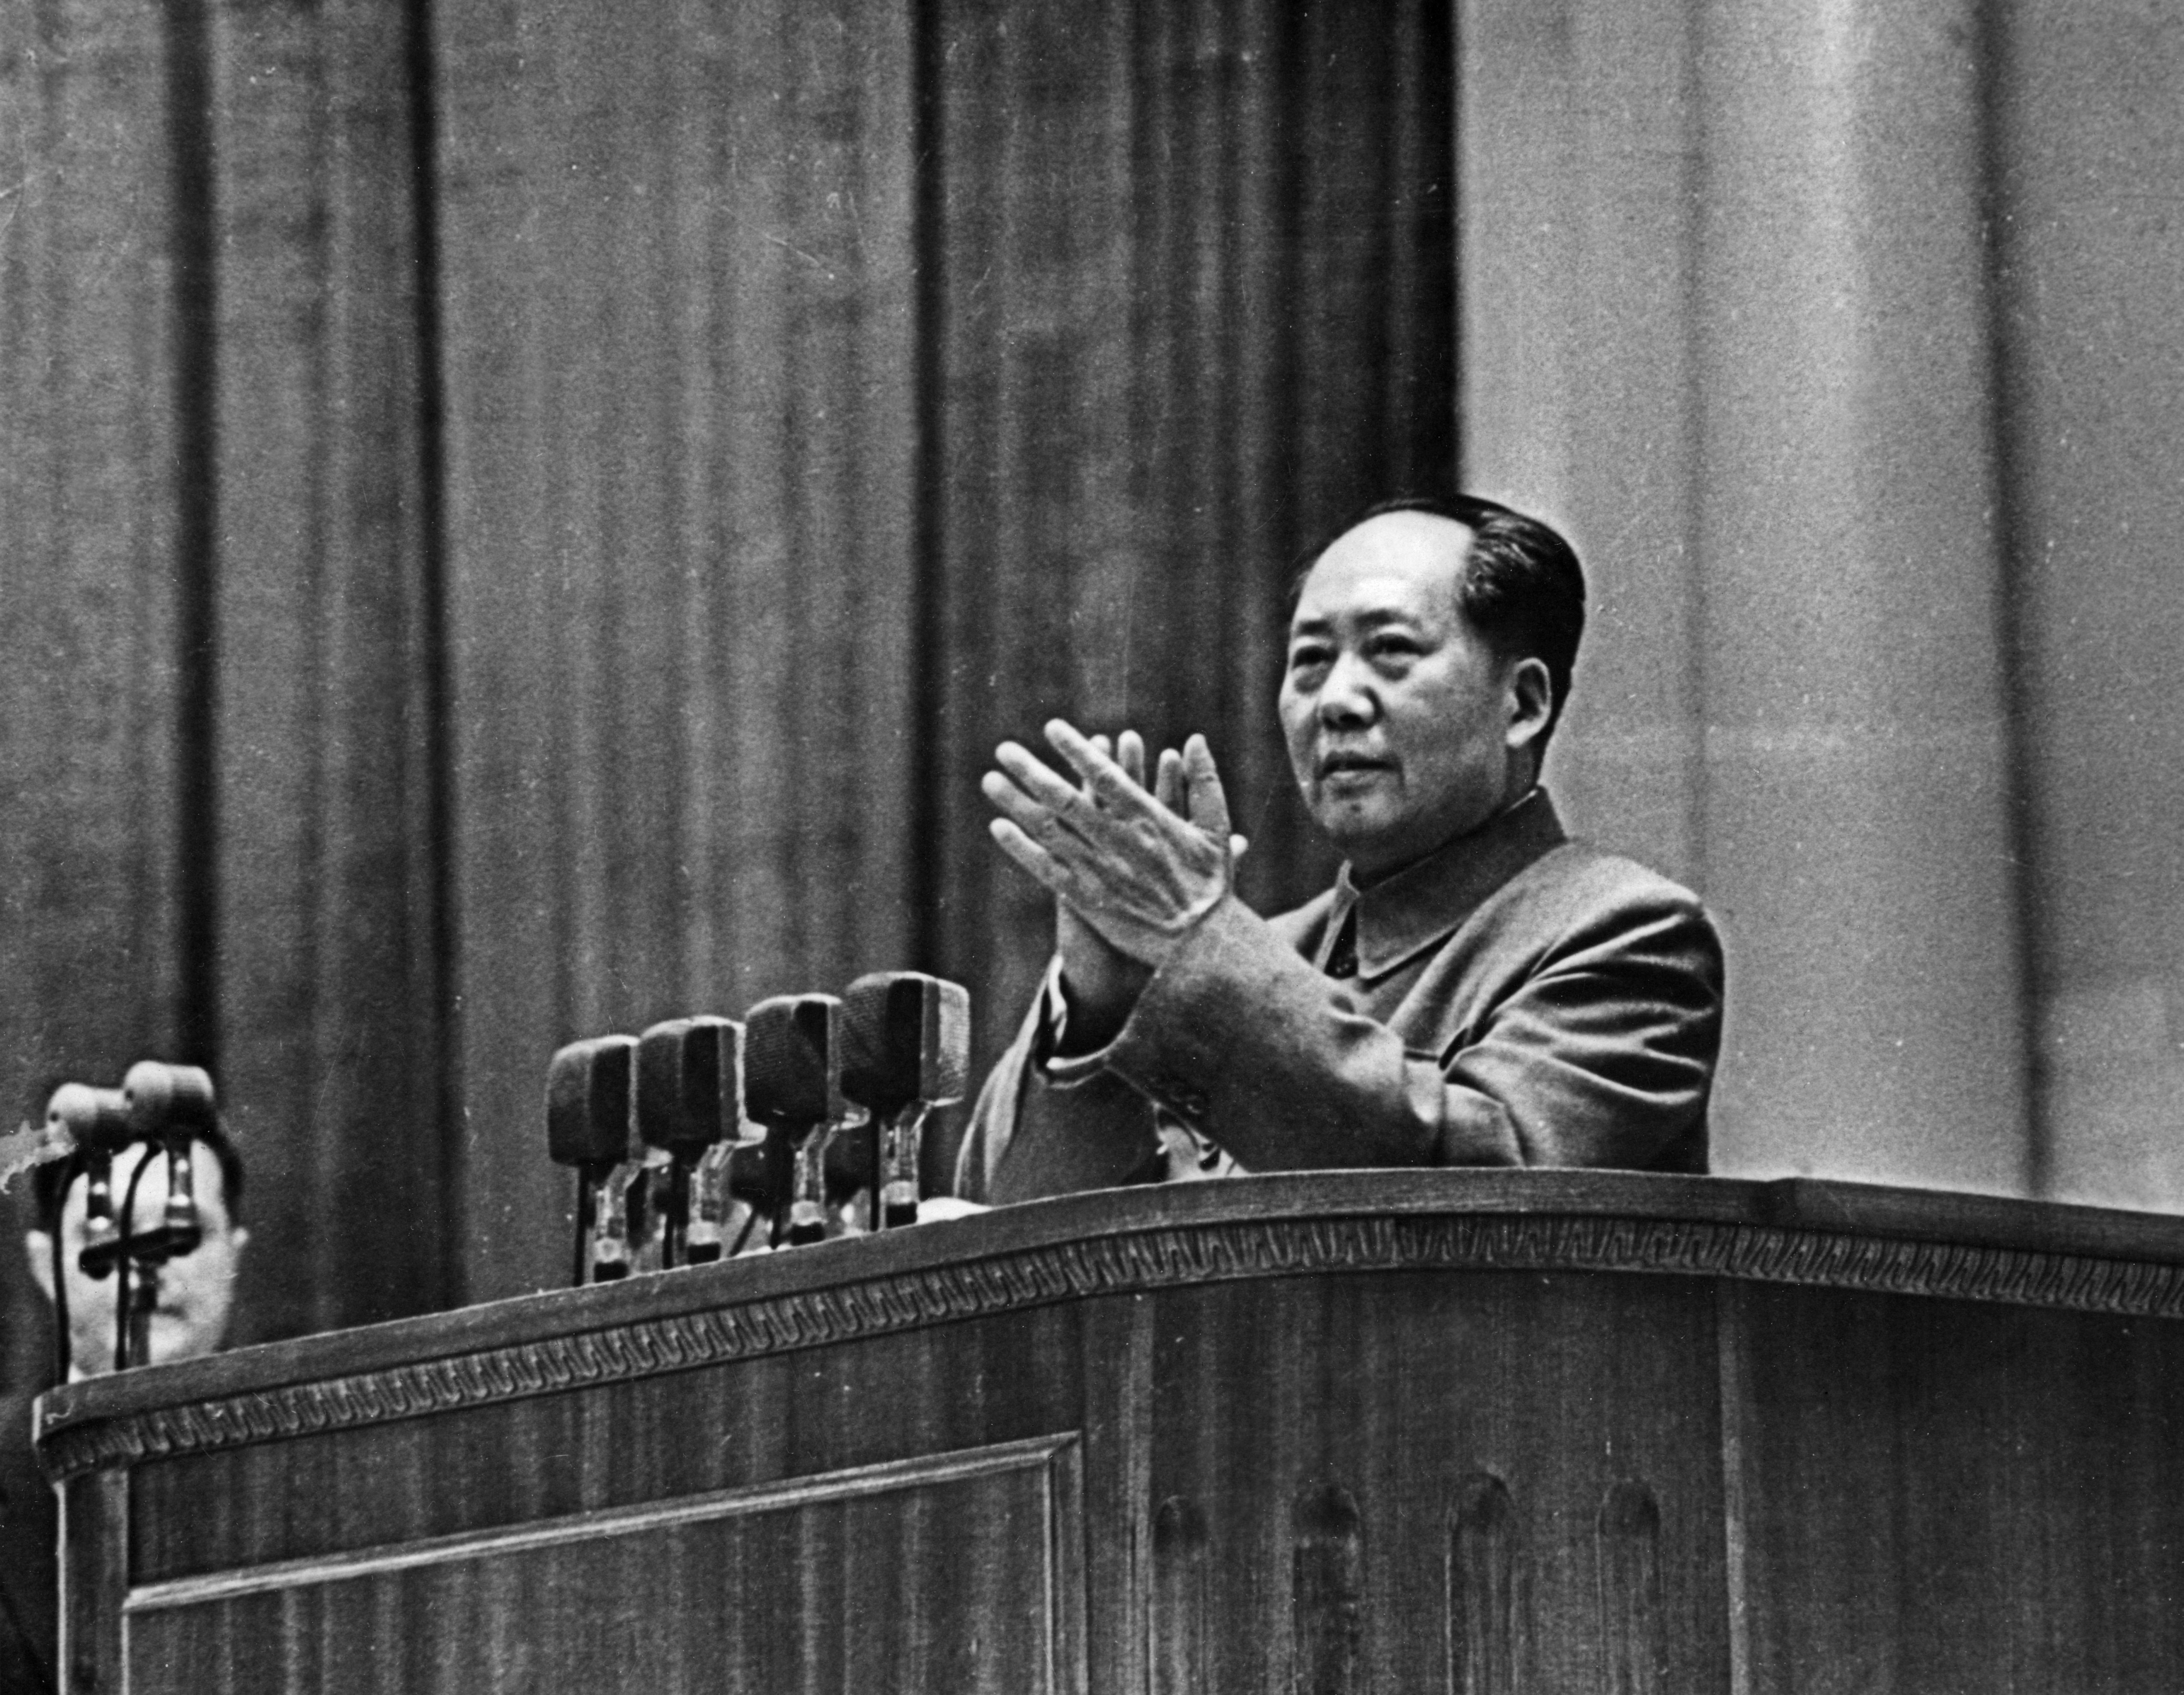 Mao Tse-Tung. Foto: Sovfoto/Universal Images Group/Shutterstock (3827540a)
